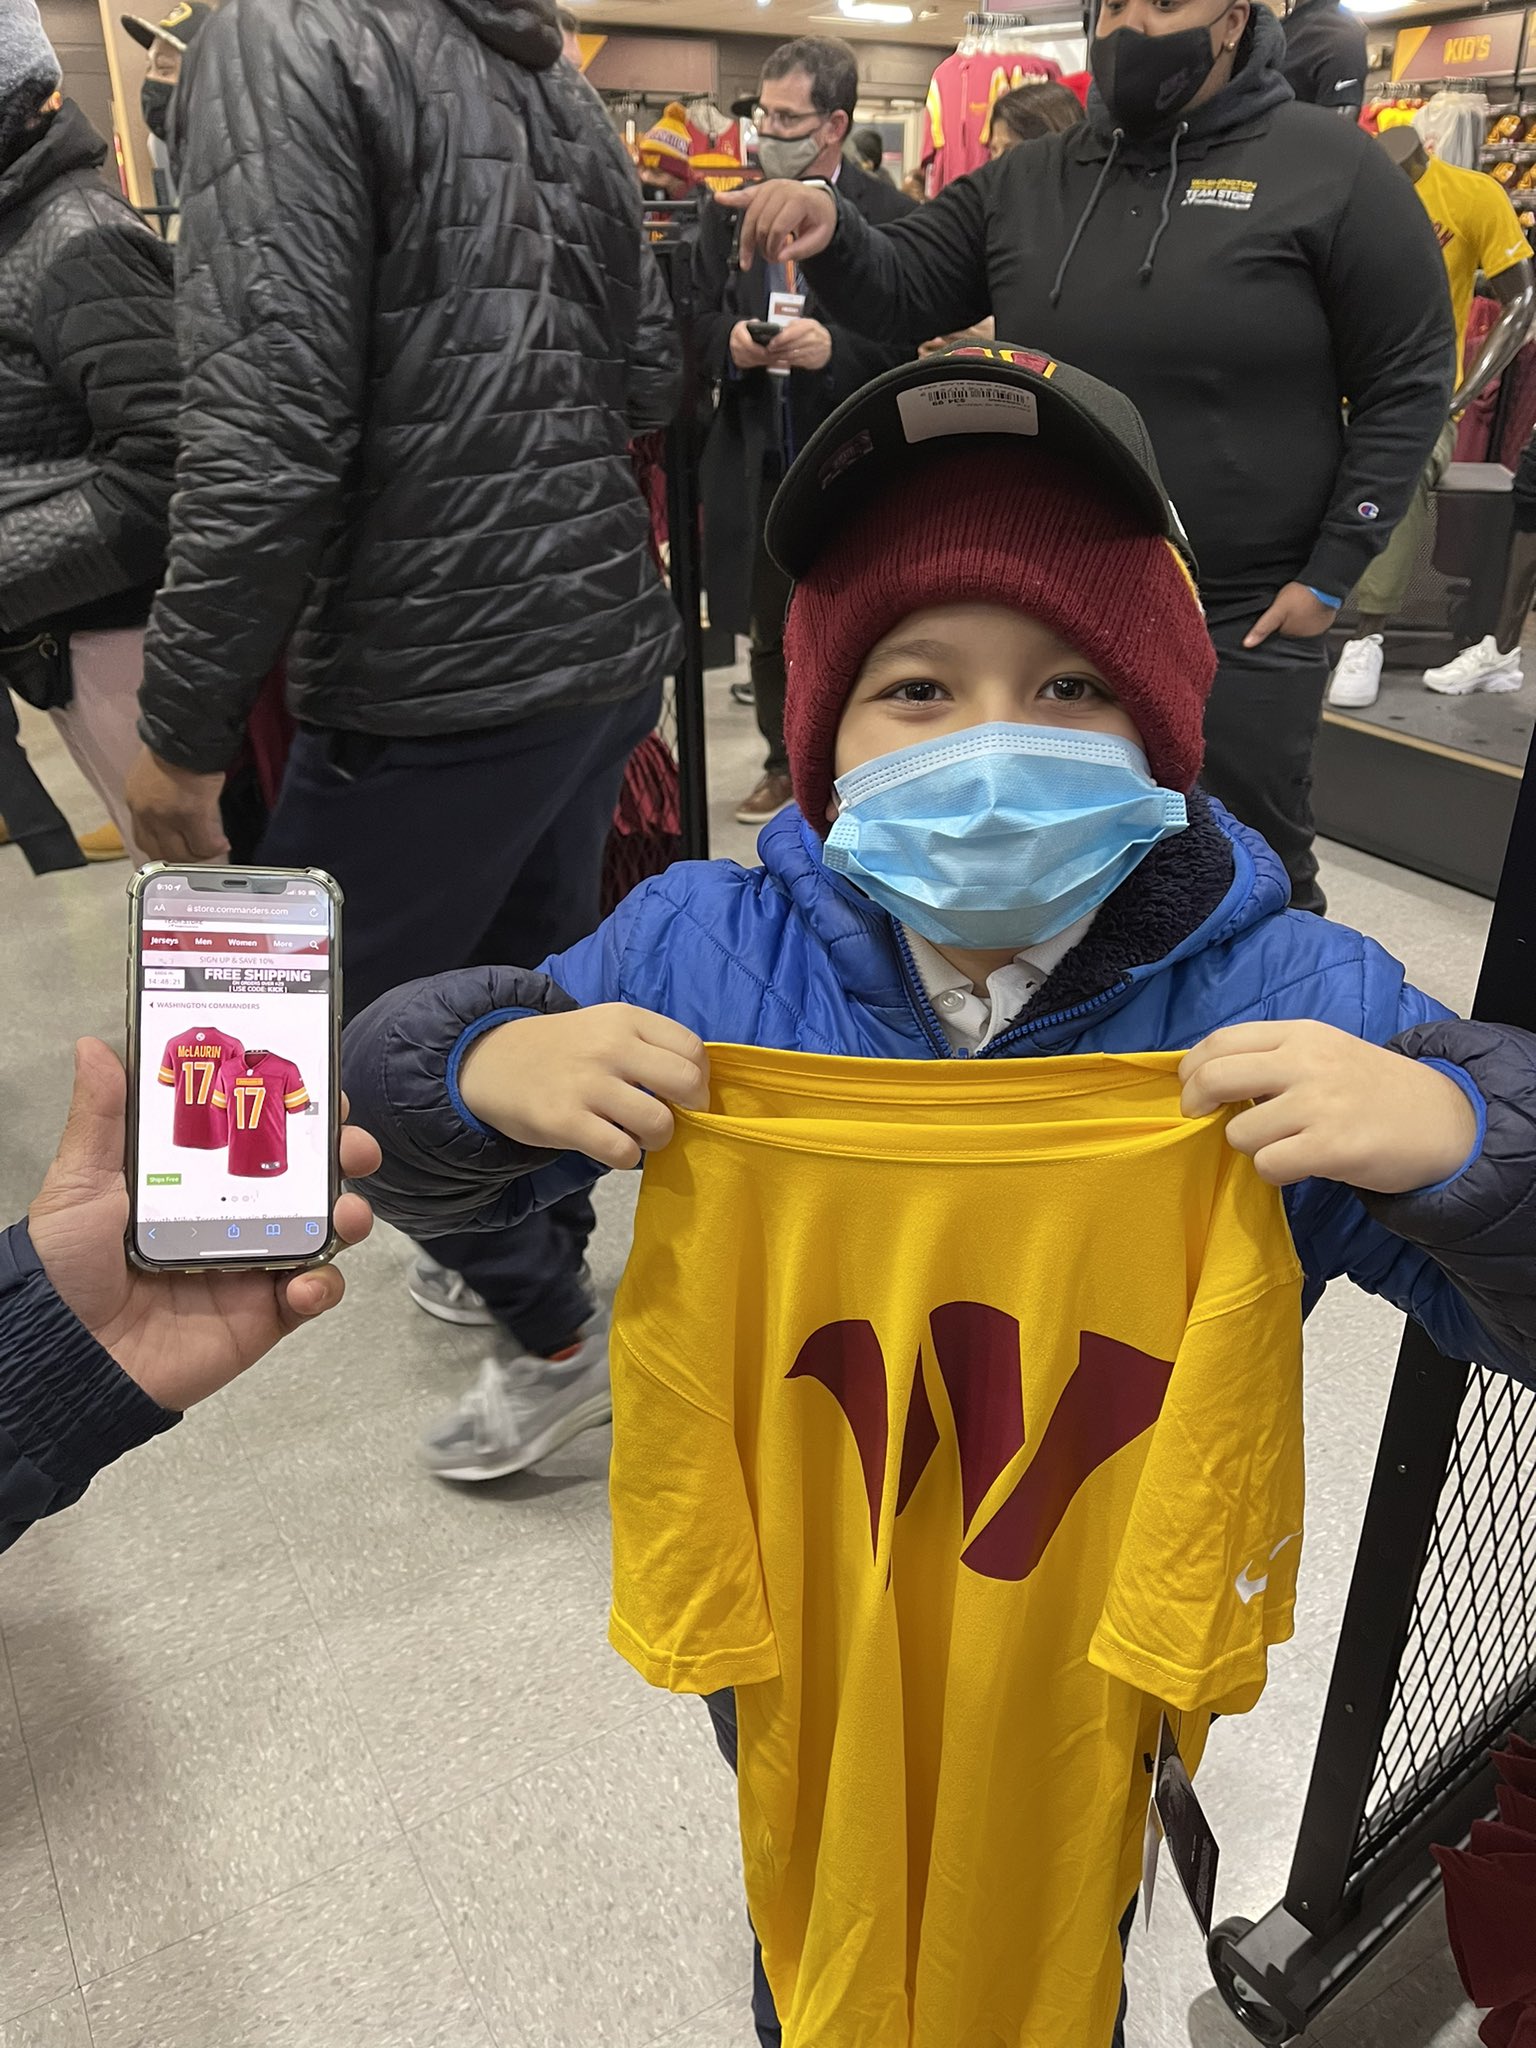 Jordan Giorgio on Twitter: 'this is 10 year old Joshua, the youngest  #WashingtonCommanders fan out at FedEx Field for the BIG reveal - he told  me he skipped school to come snag